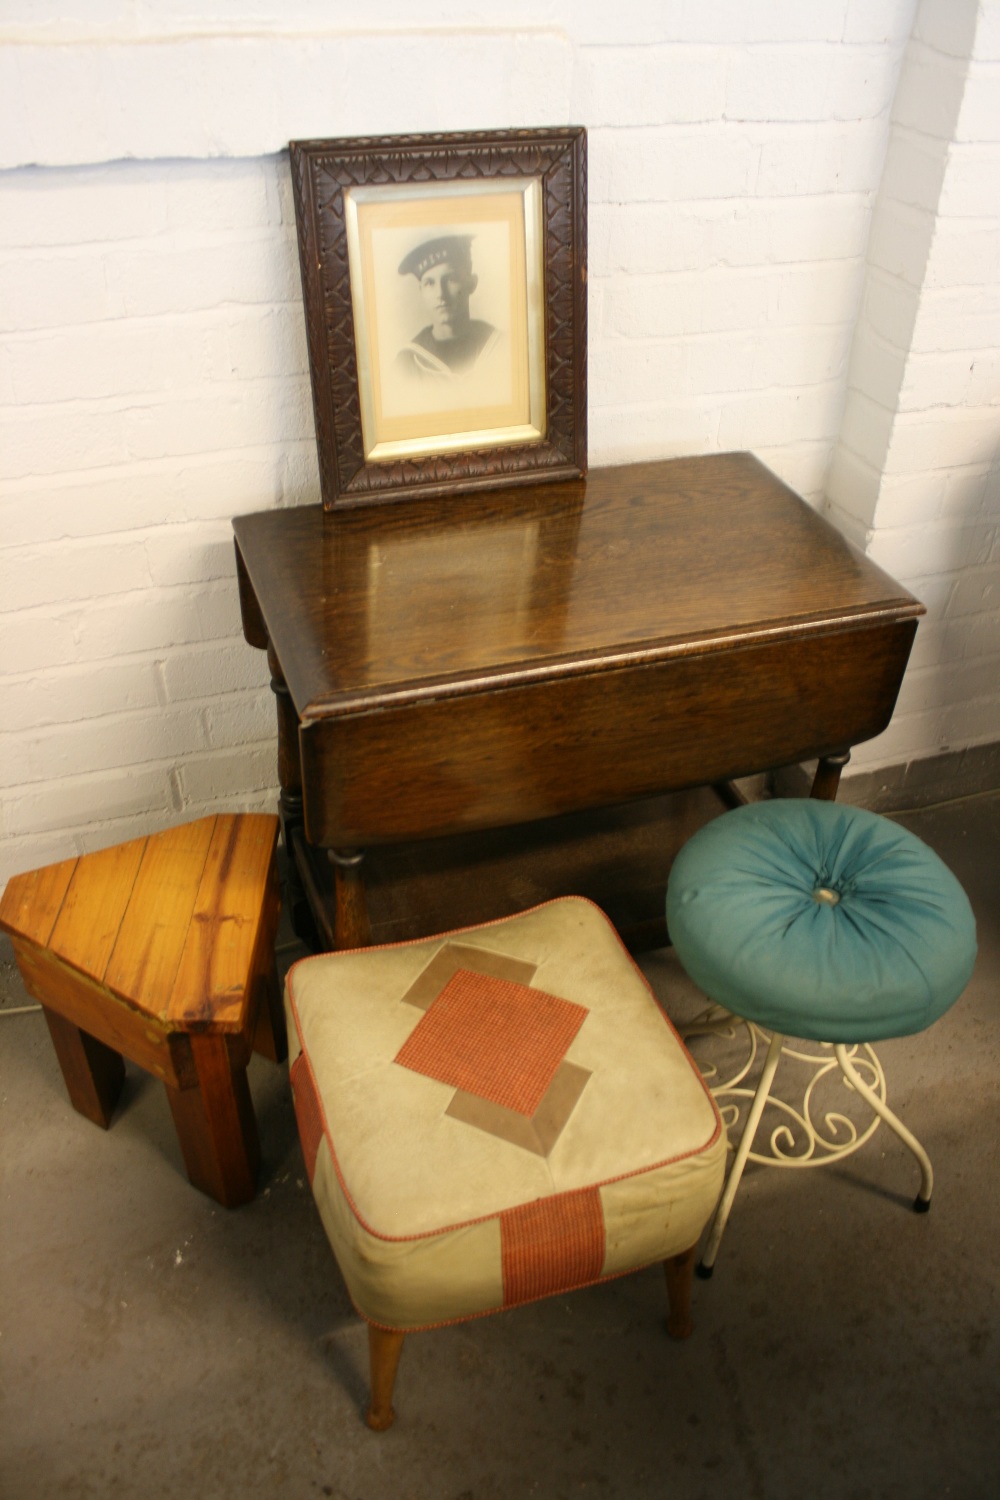 SIDE TABLE & STOOLS - an oak gate legged side table on castors, 3 individual stools - one wooden,